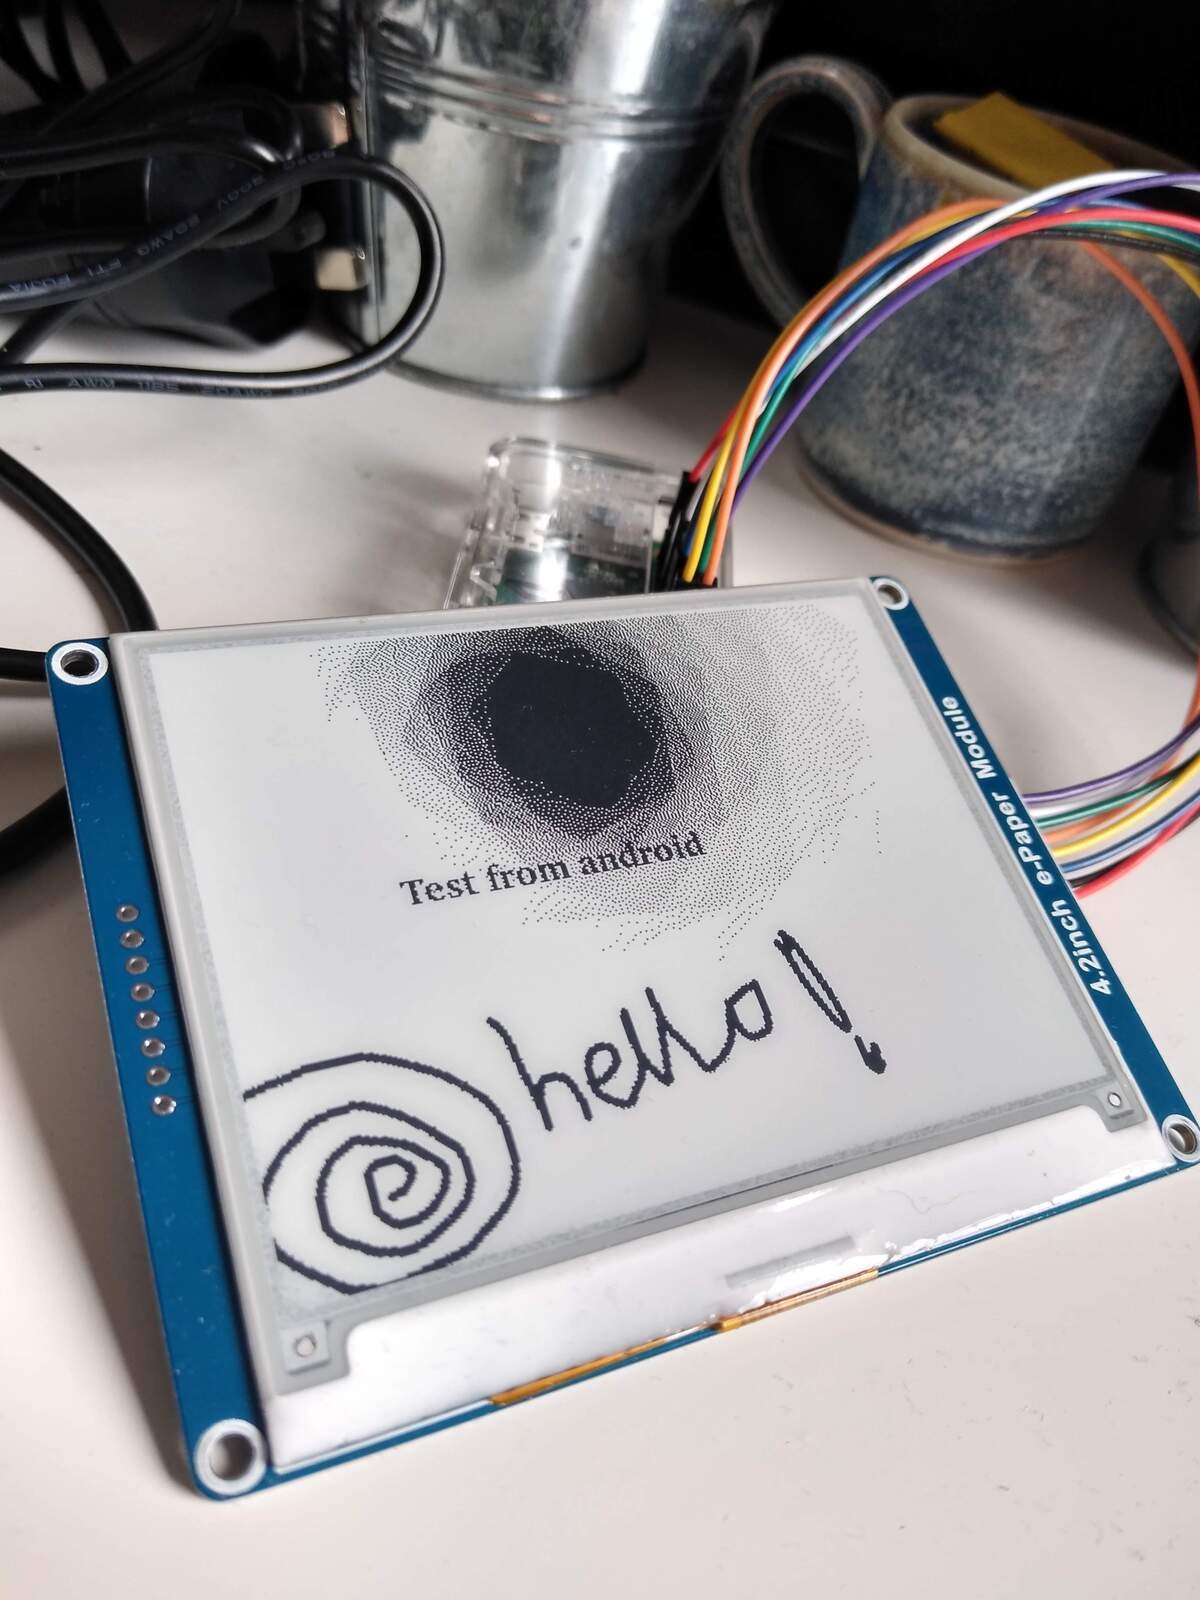 The innards of marco – the screen, attached to a PI zero, showing the ability to draw and add text to the screen